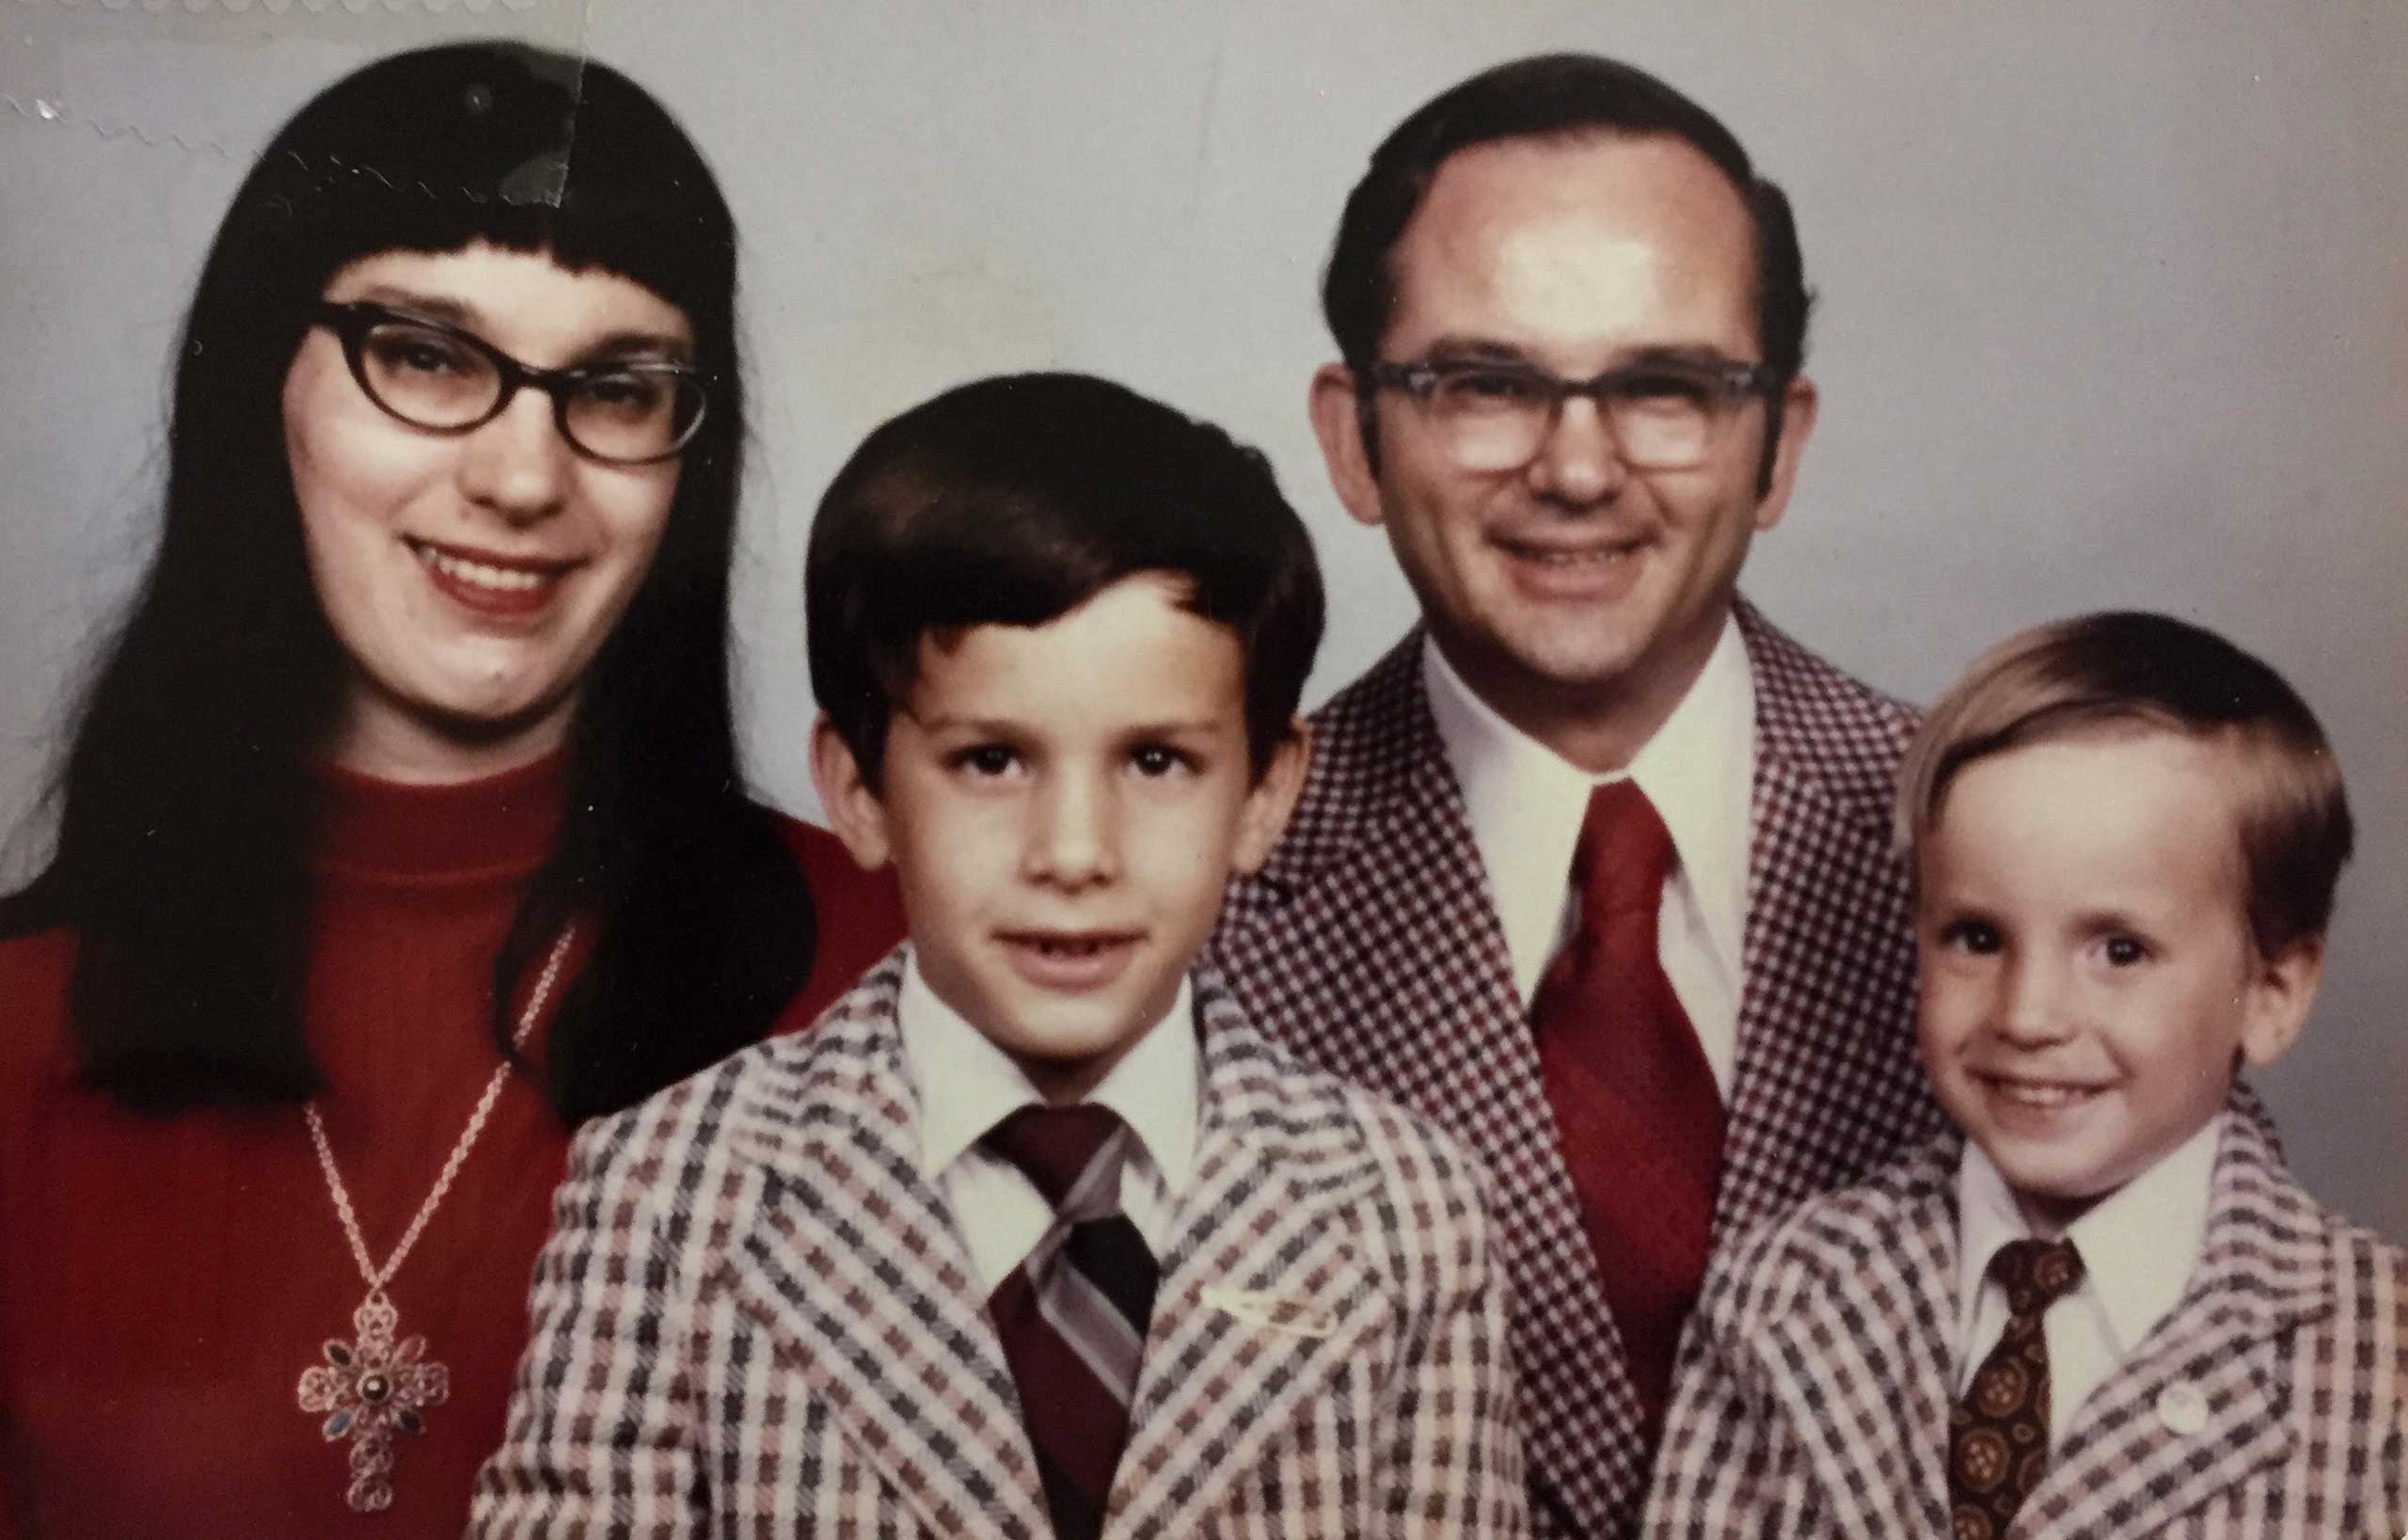 Scott Walker appears with his younger brother David and his parents Llew and Pat in this undated photo.